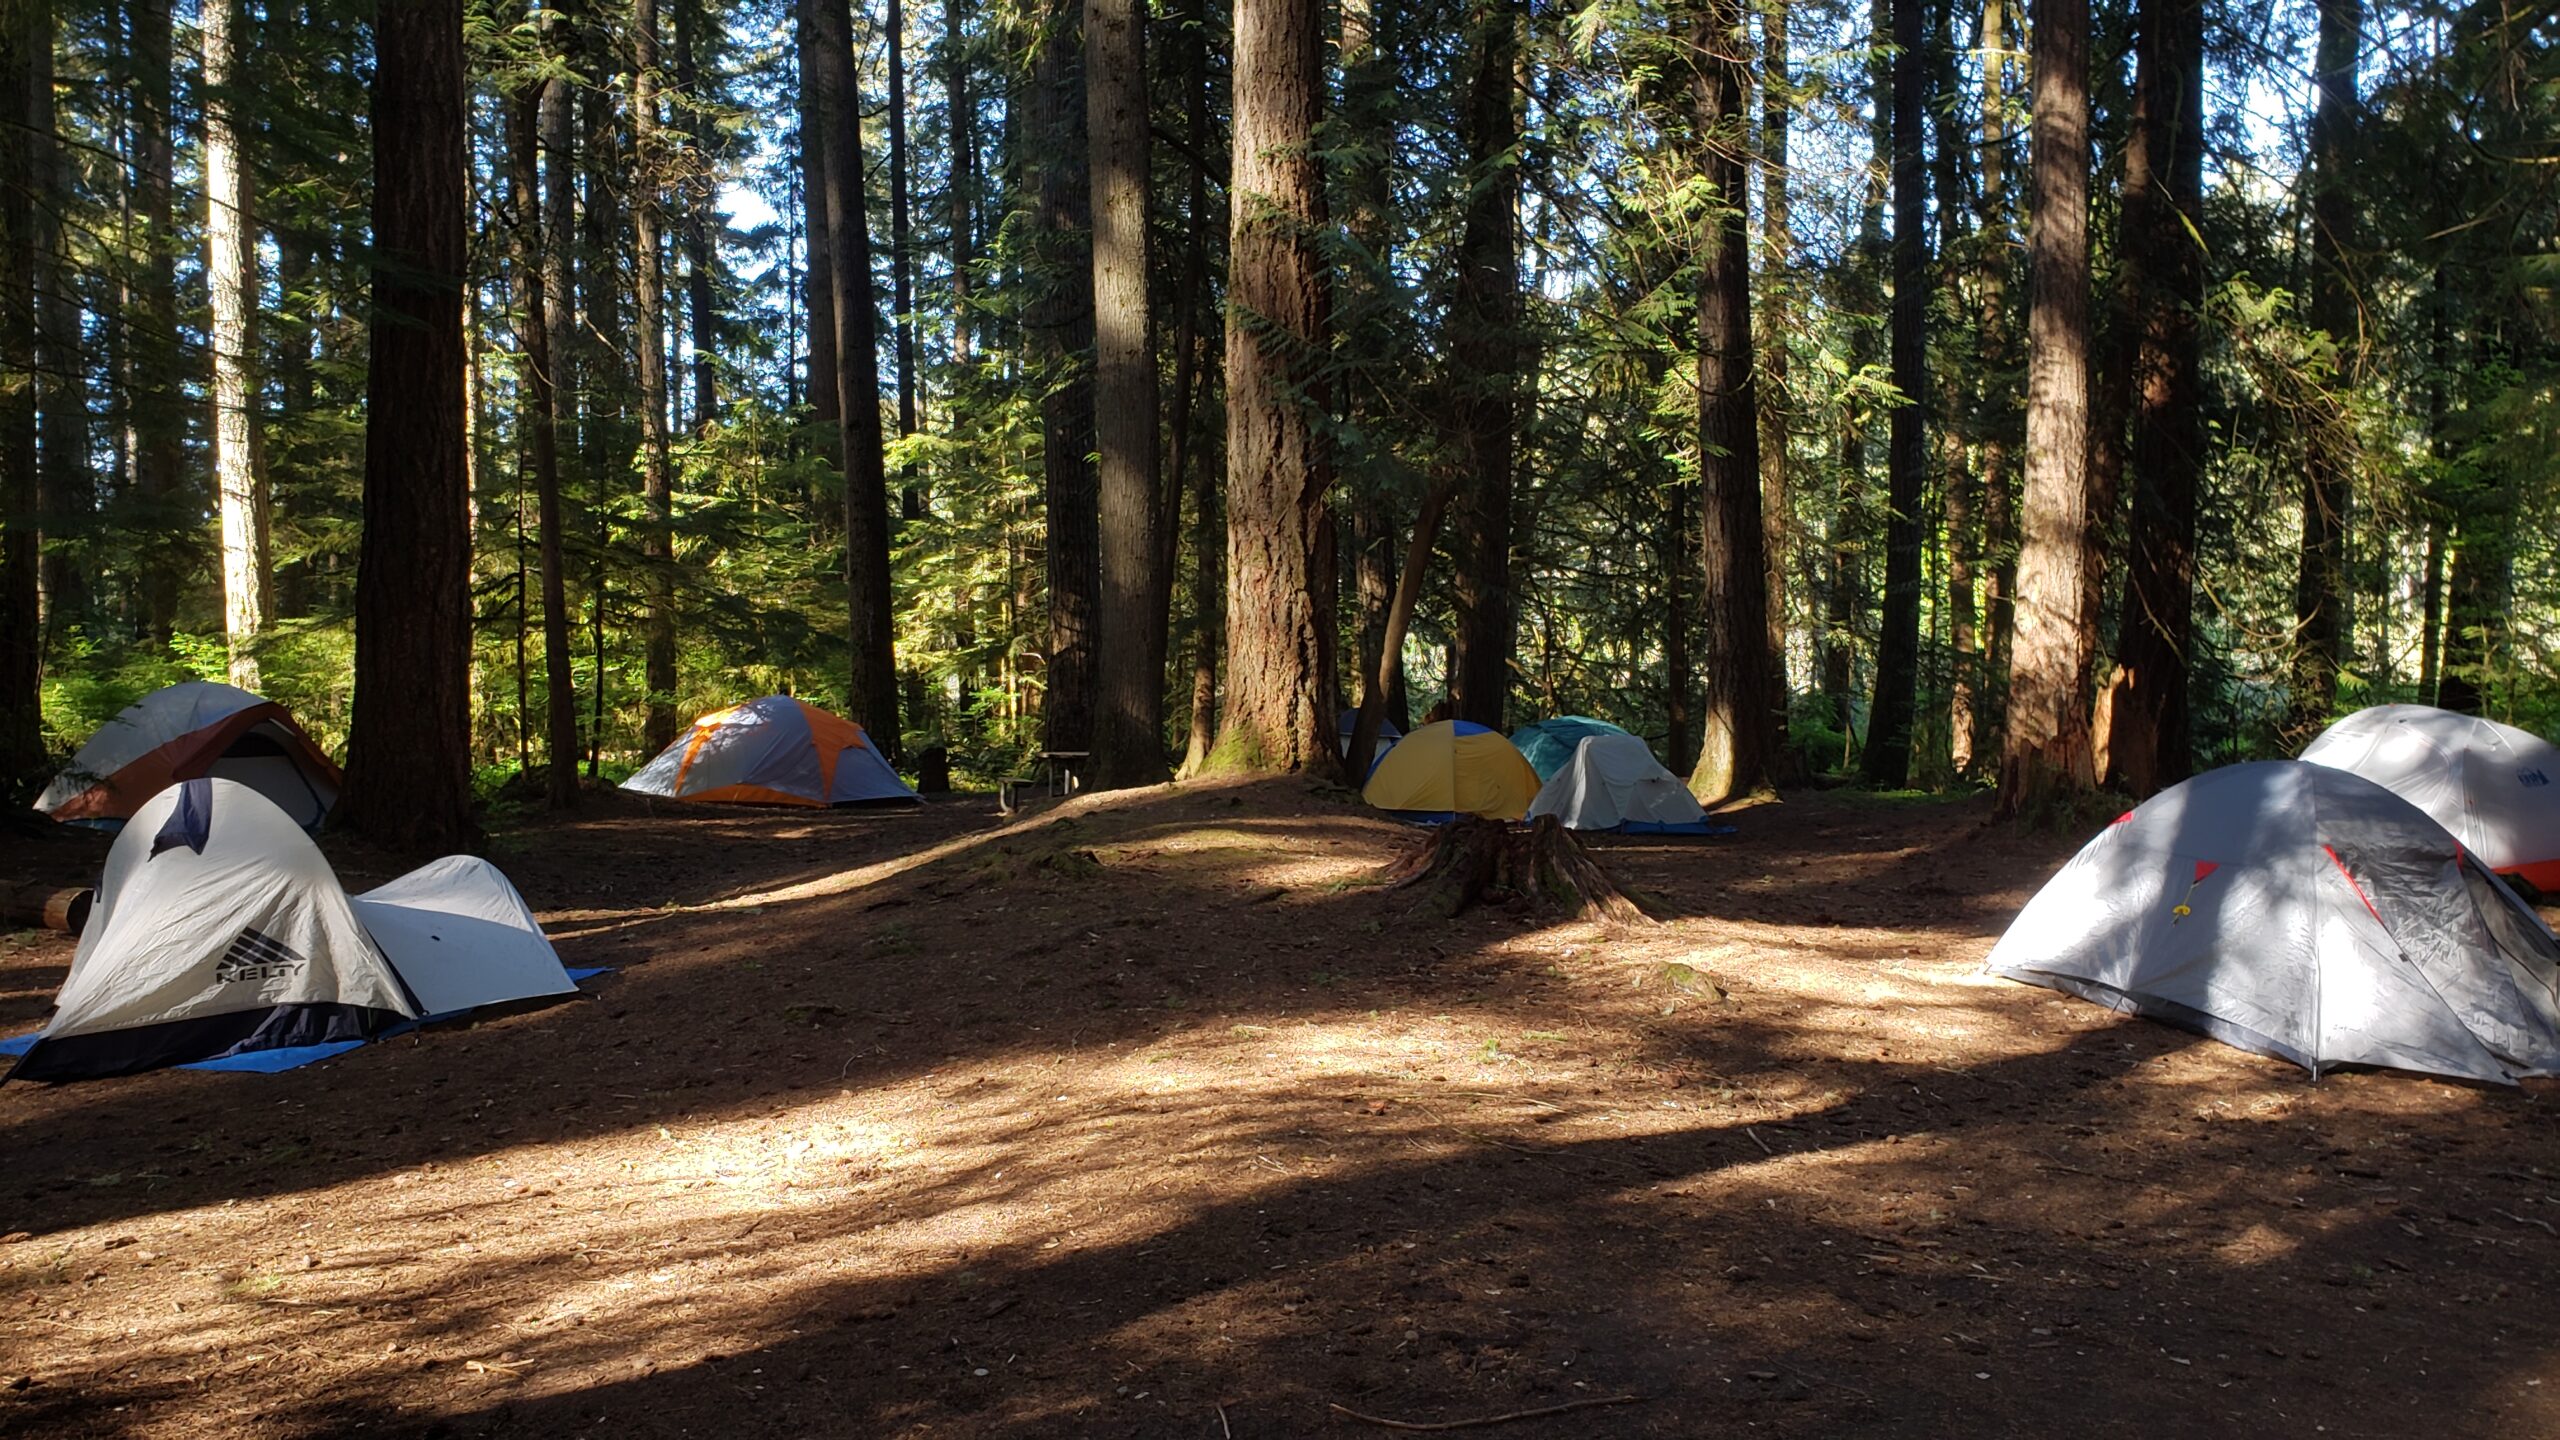 Tents pitched in the woods.